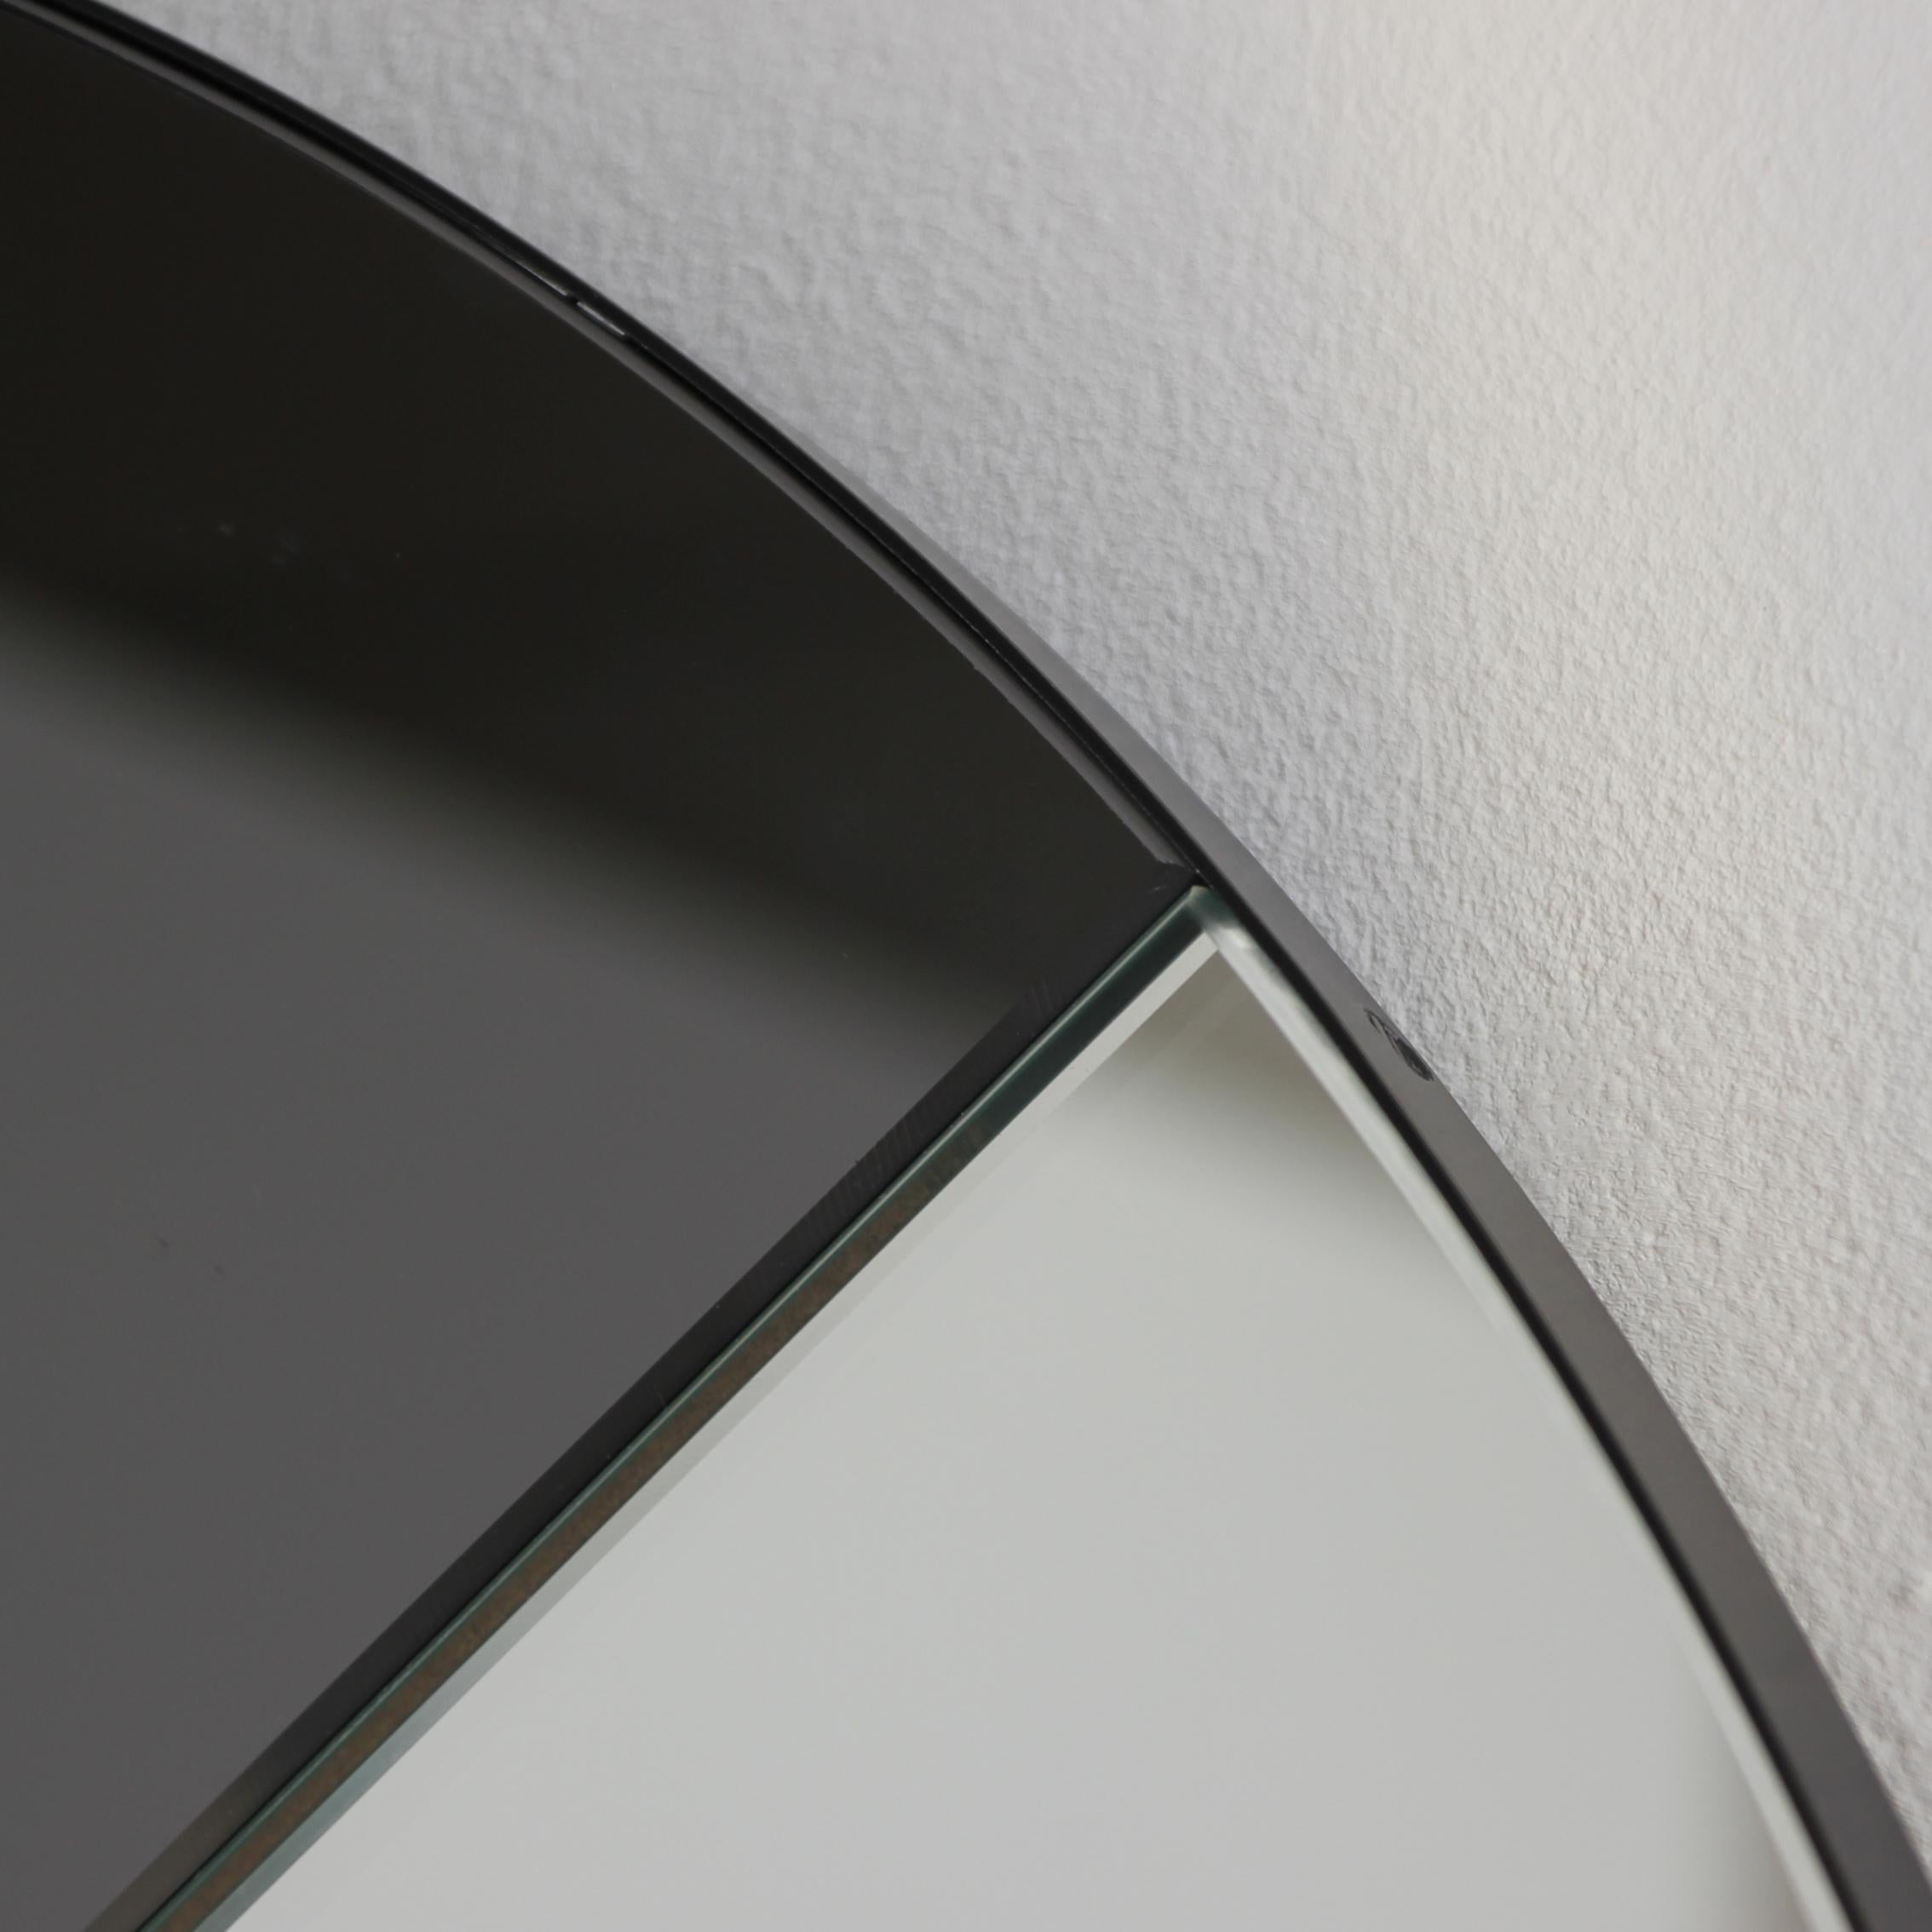 Orbis Dualis Mixed Tint Contemporary Round Mirror with Black Frame, Large In New Condition For Sale In London, GB